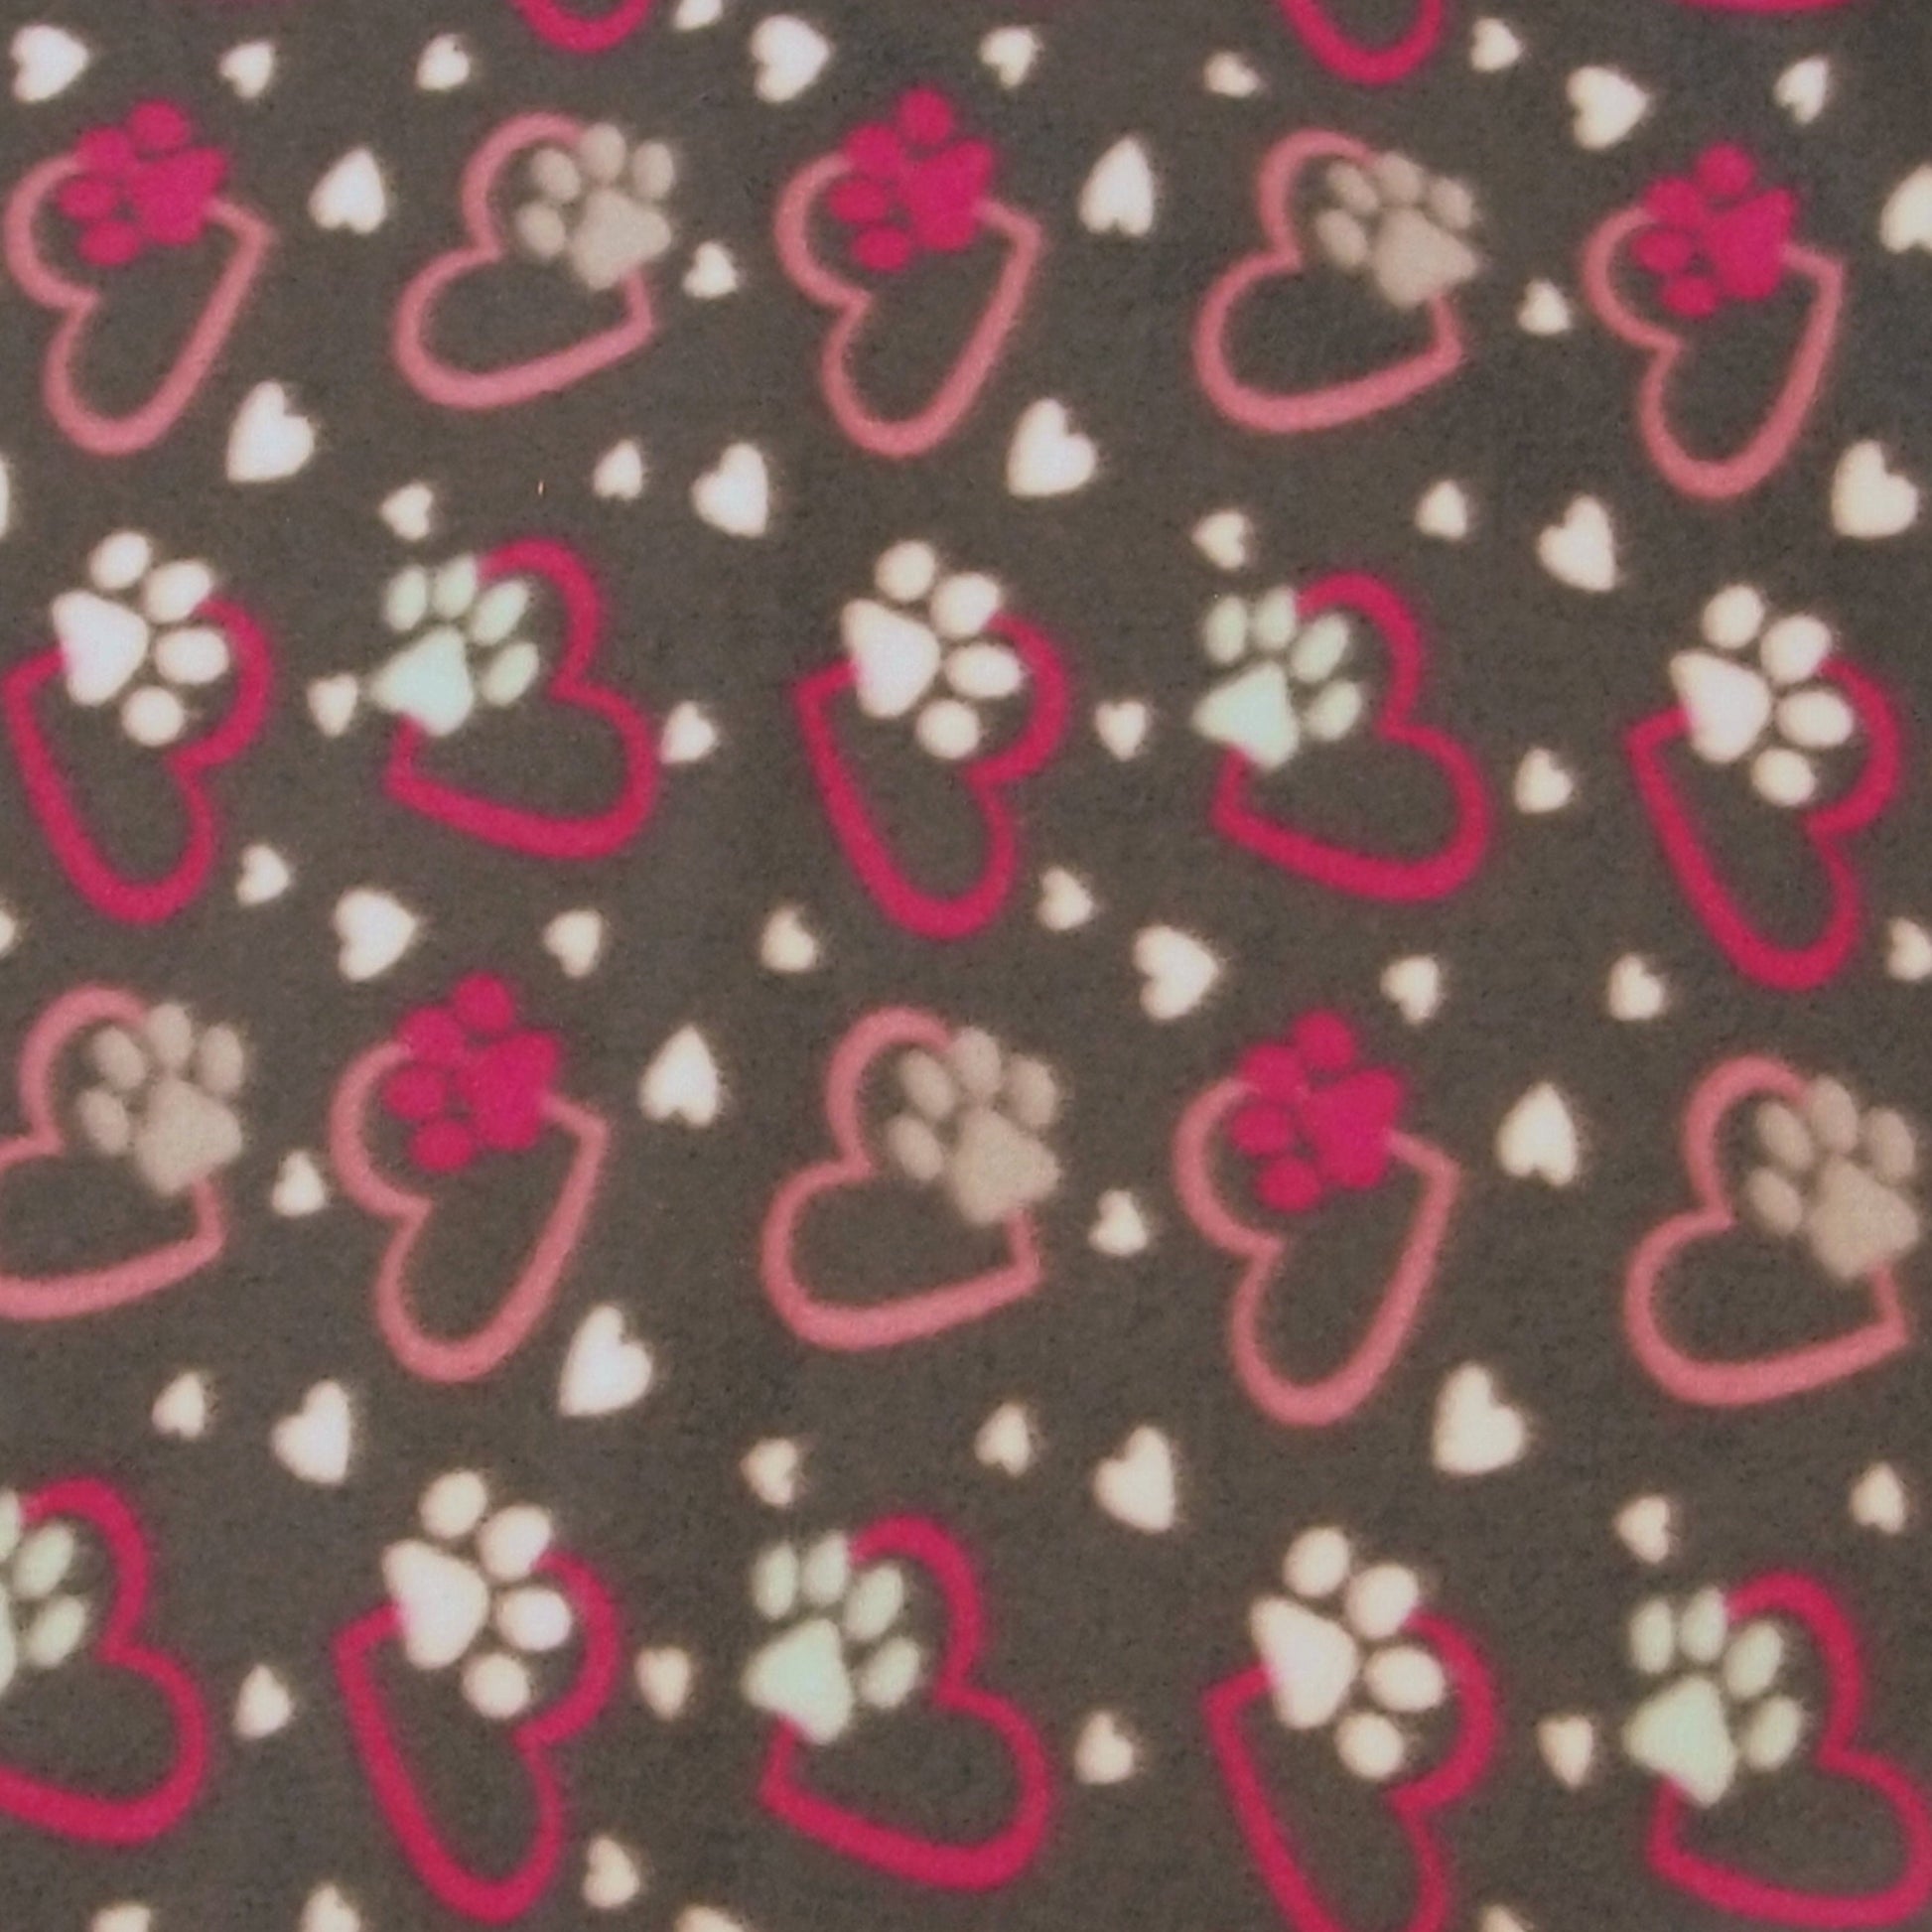 Reversible, 2-Sided Fleece Stroller/Crate Dog Blanket : Gray + Pink, Hearts and Paws w. Hot Pink back  27" x 29" - LEAGUE OF CRAFTY CANINES